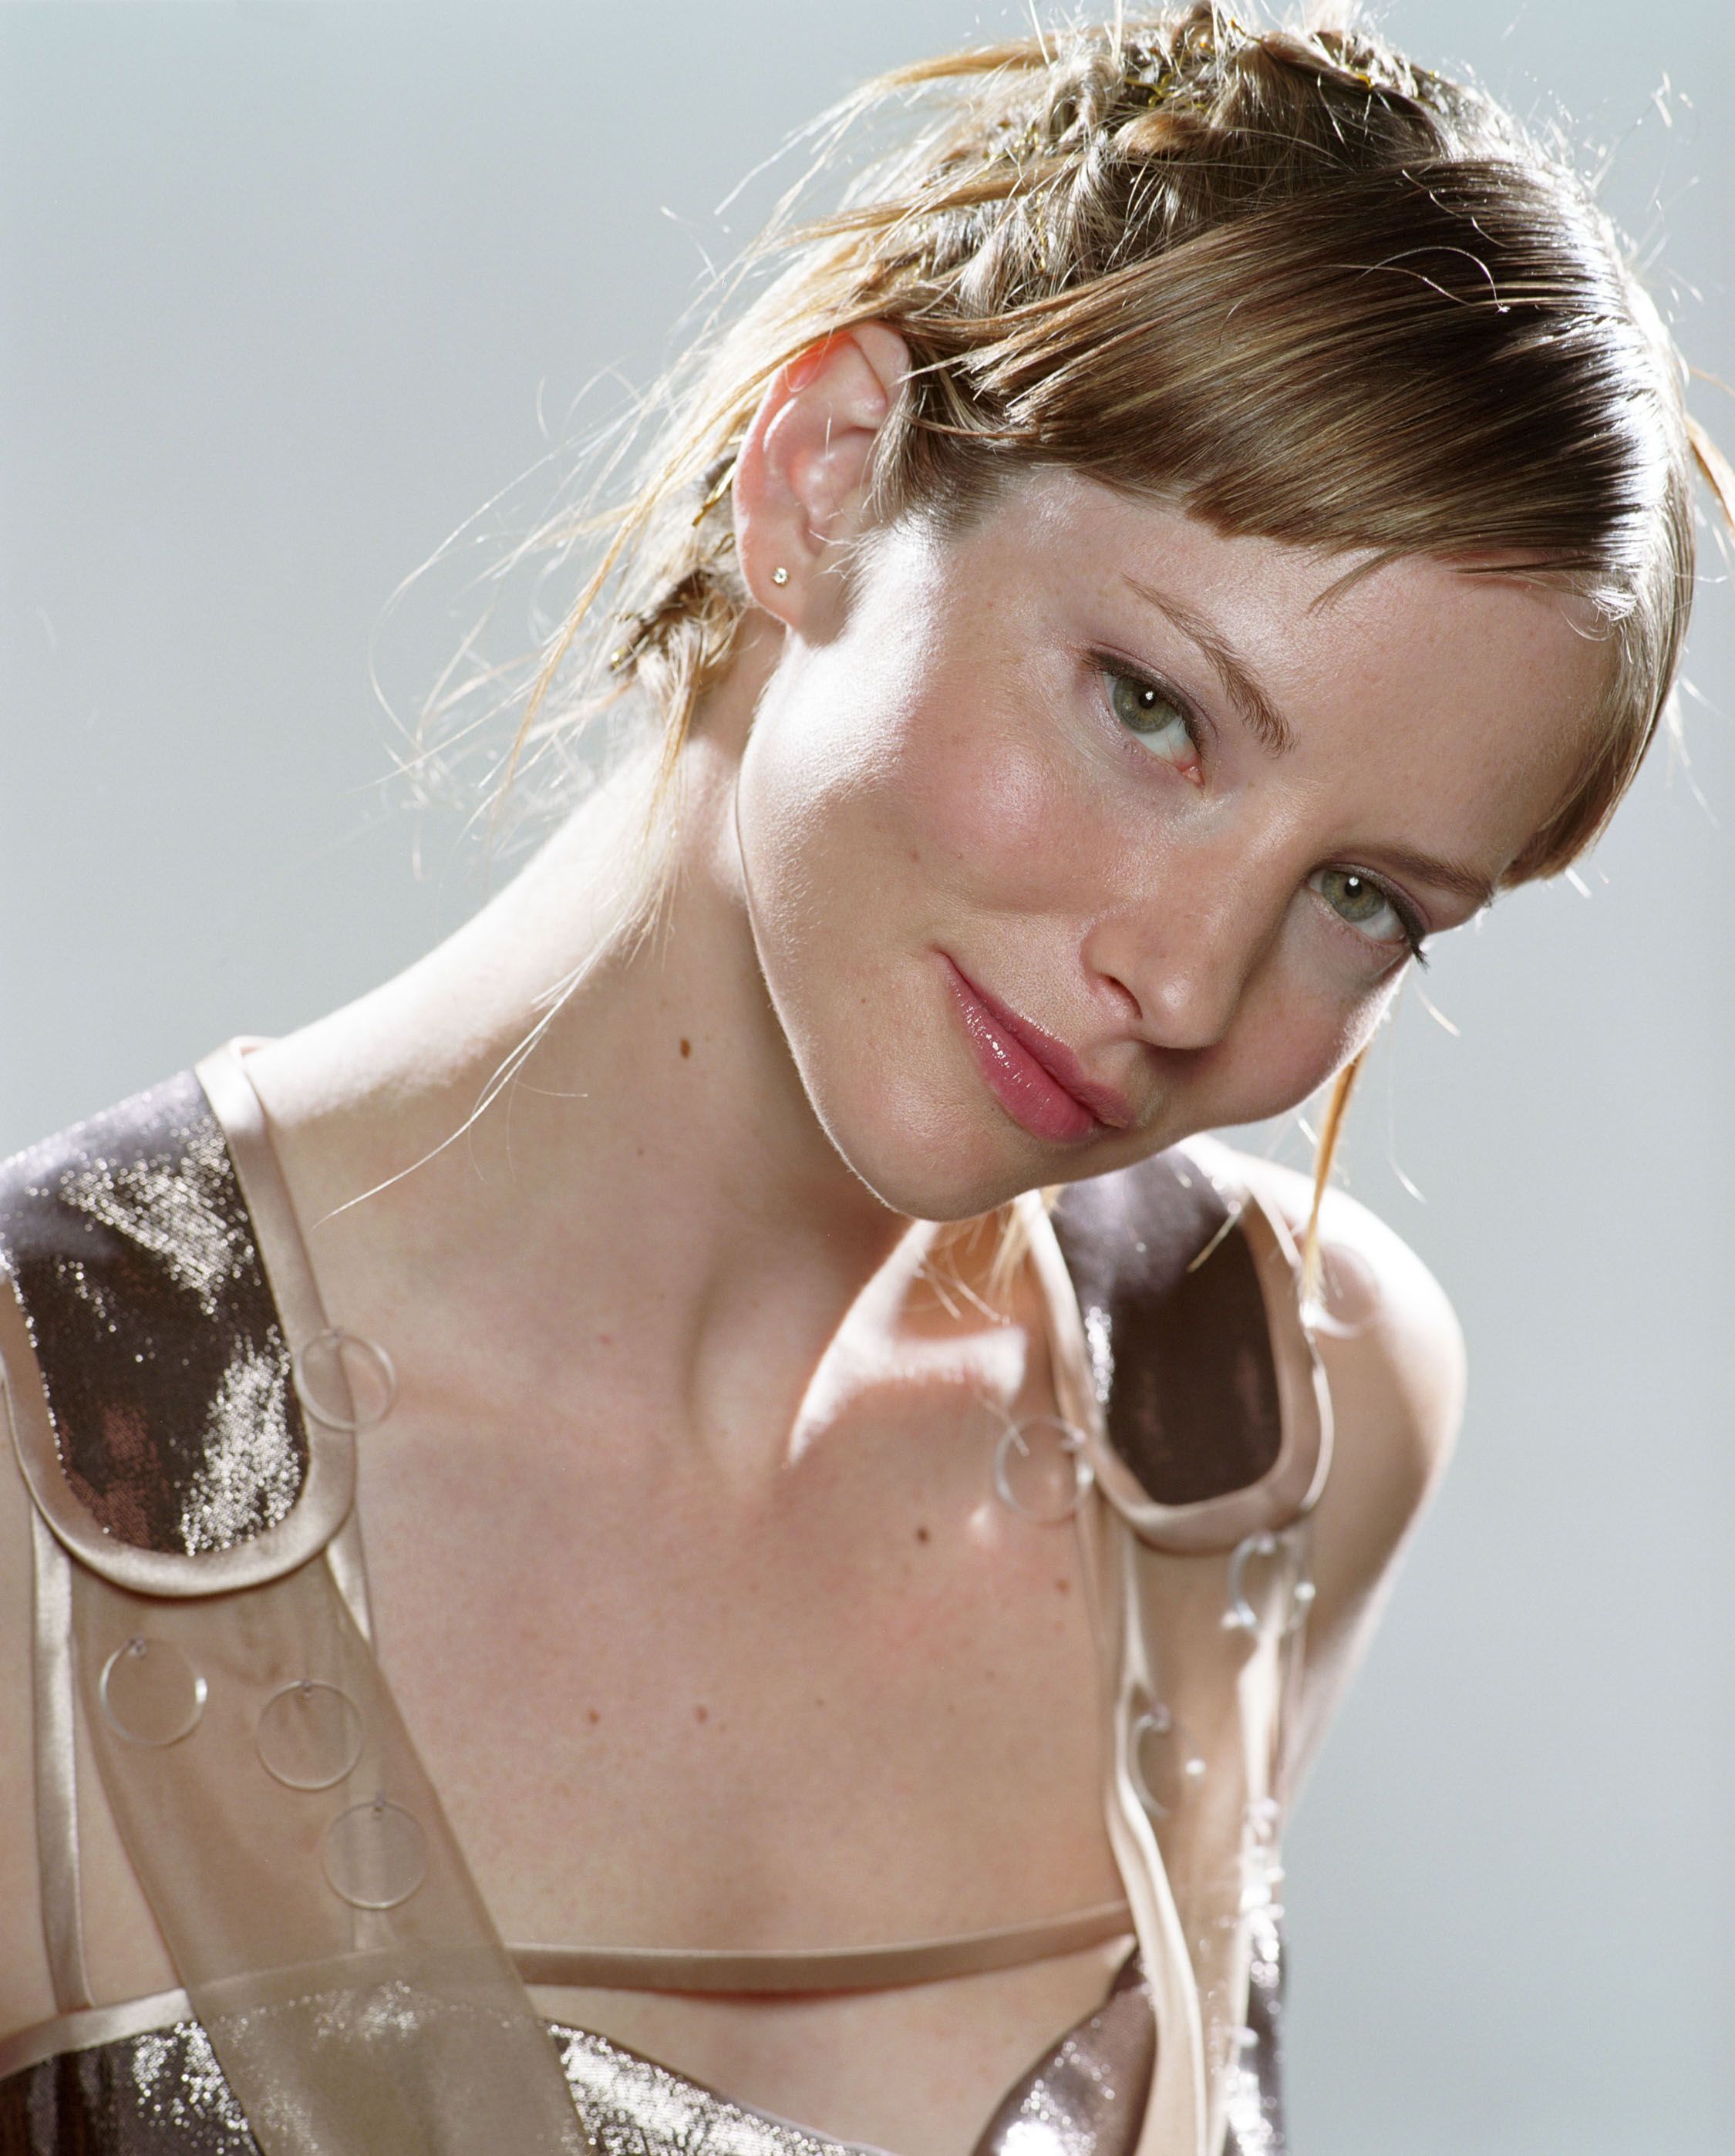 Guillory pics sienna Sienna Guillory